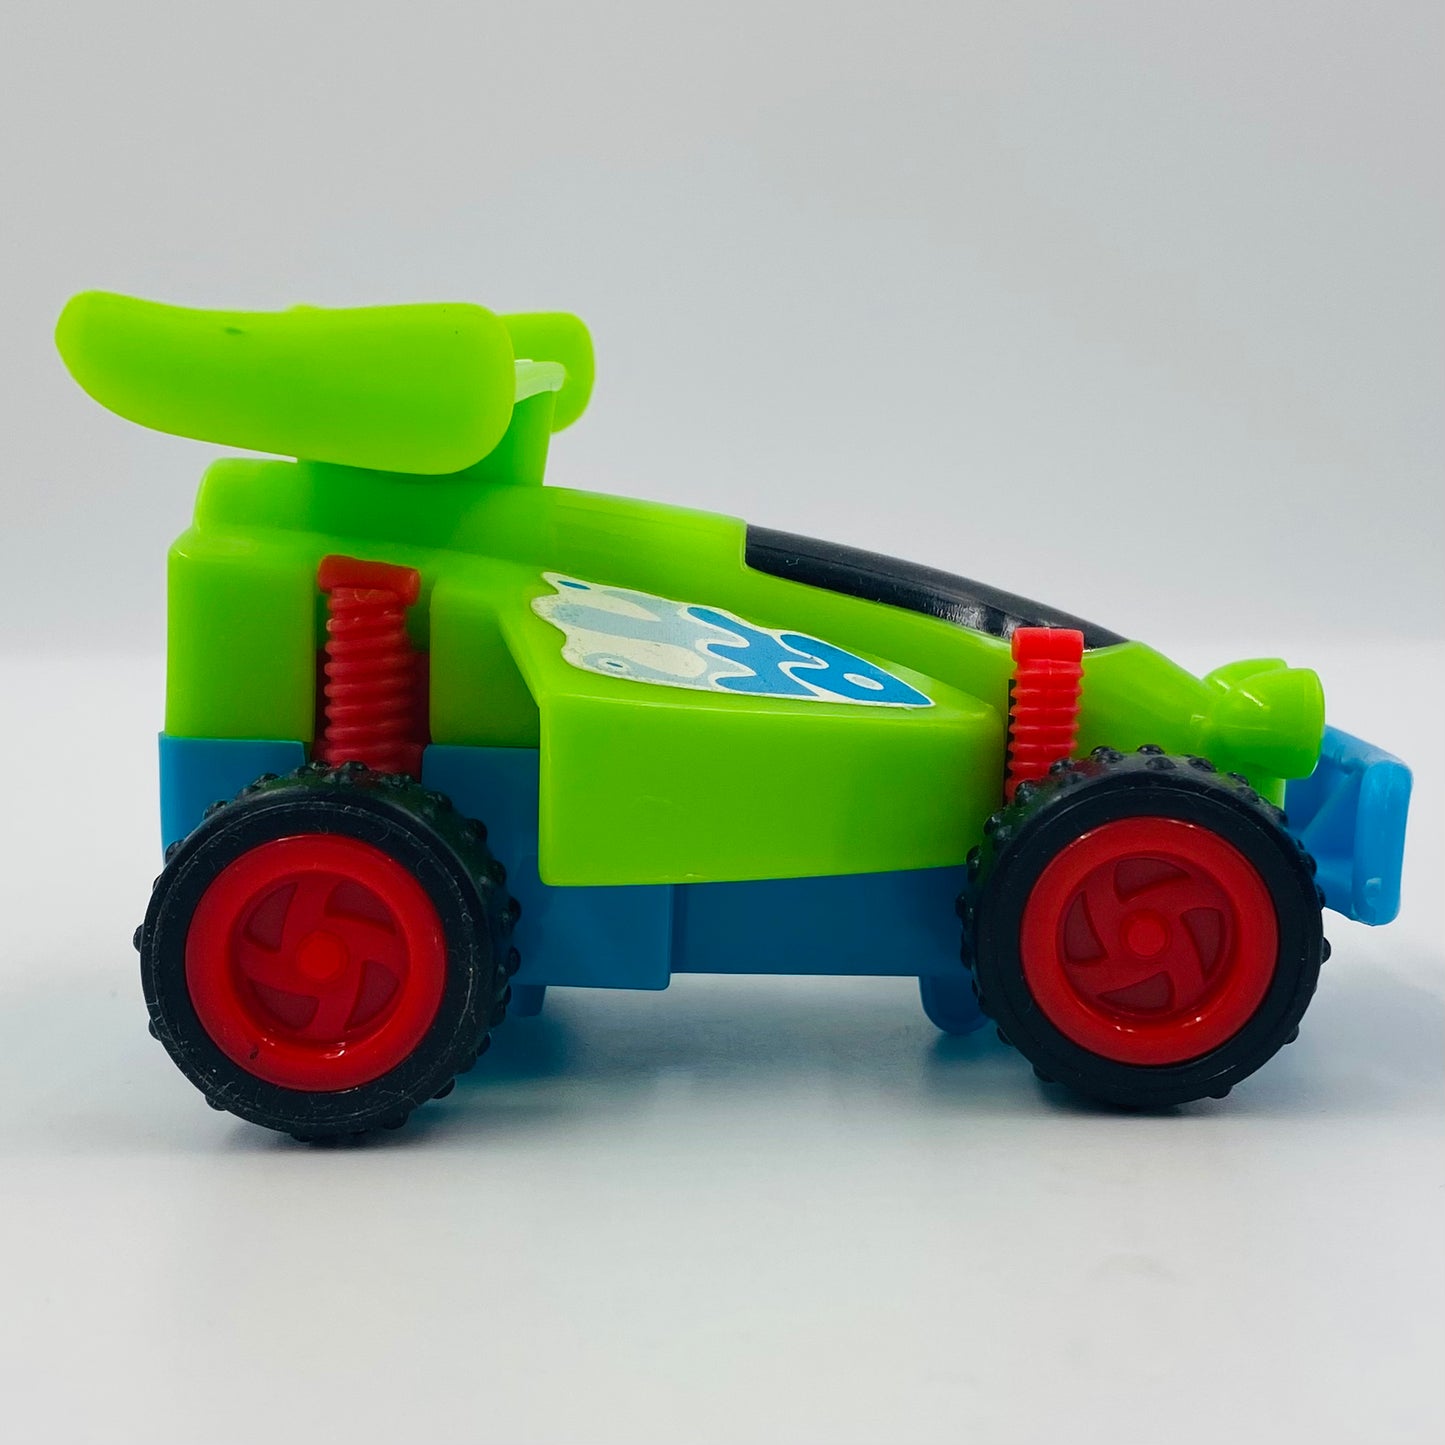 Toy Story 2 RC Car wind up vehicle McDonald's Happy Meal toy (1999) loose